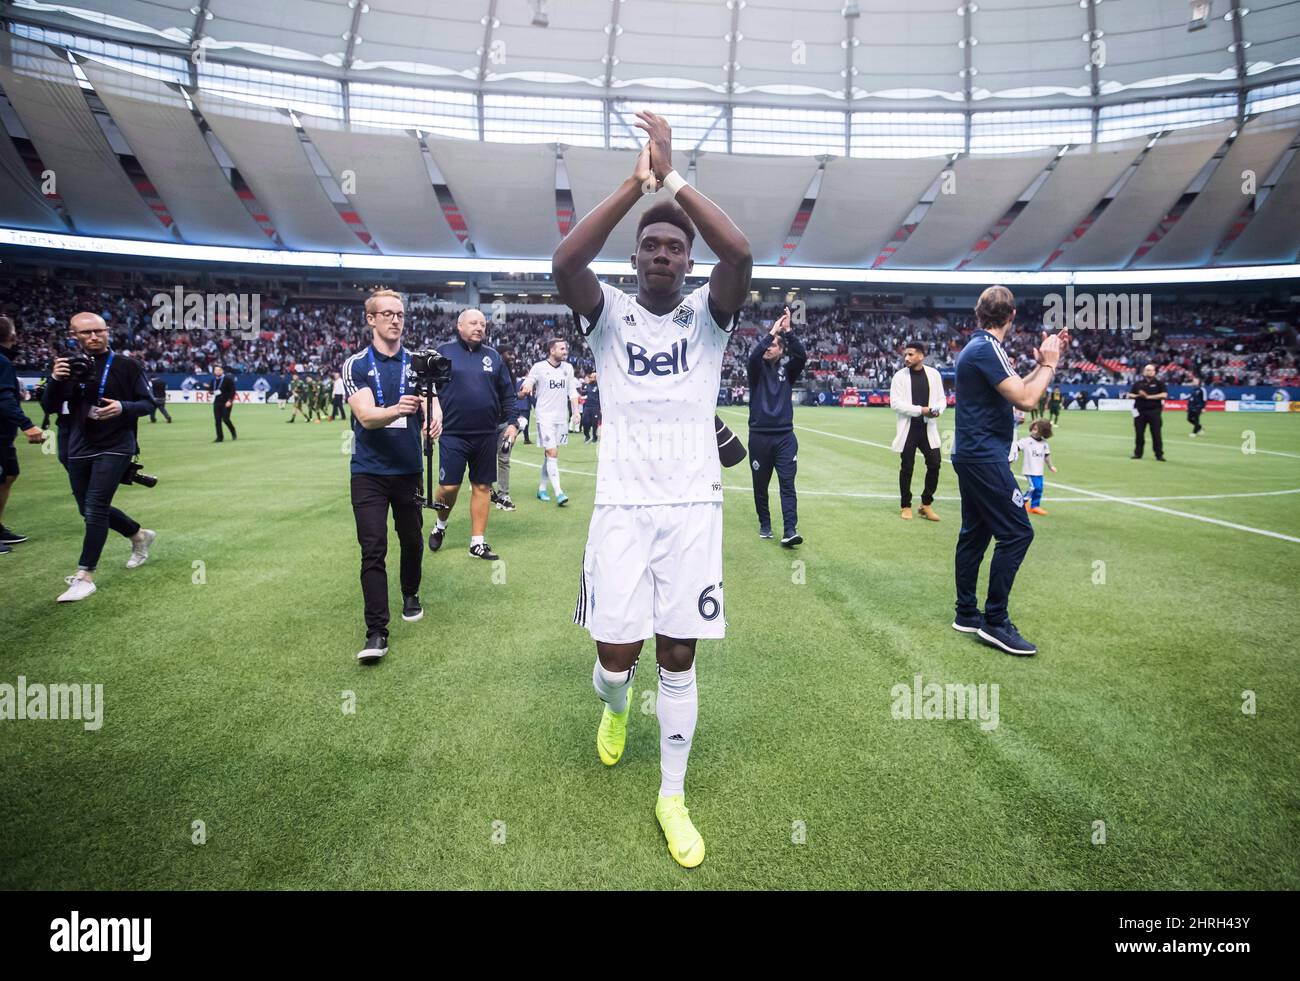 Vancouver Whitecaps midfielder Alphonso Davies salutes the crowd after playing his final match as a member of the MLS soccer team, in Vancouver, on October 28, 2018. Canada captains Scott Arfield and Christine Sinclair join Bayern Munich teenager Alphonso Davies and Manchester City striker Janine Beckie in a deep pool of candidates for the Canada Soccer Player of the Year Awards. THE CANADIAN PRESS/Darryl Dyck Stock Photo